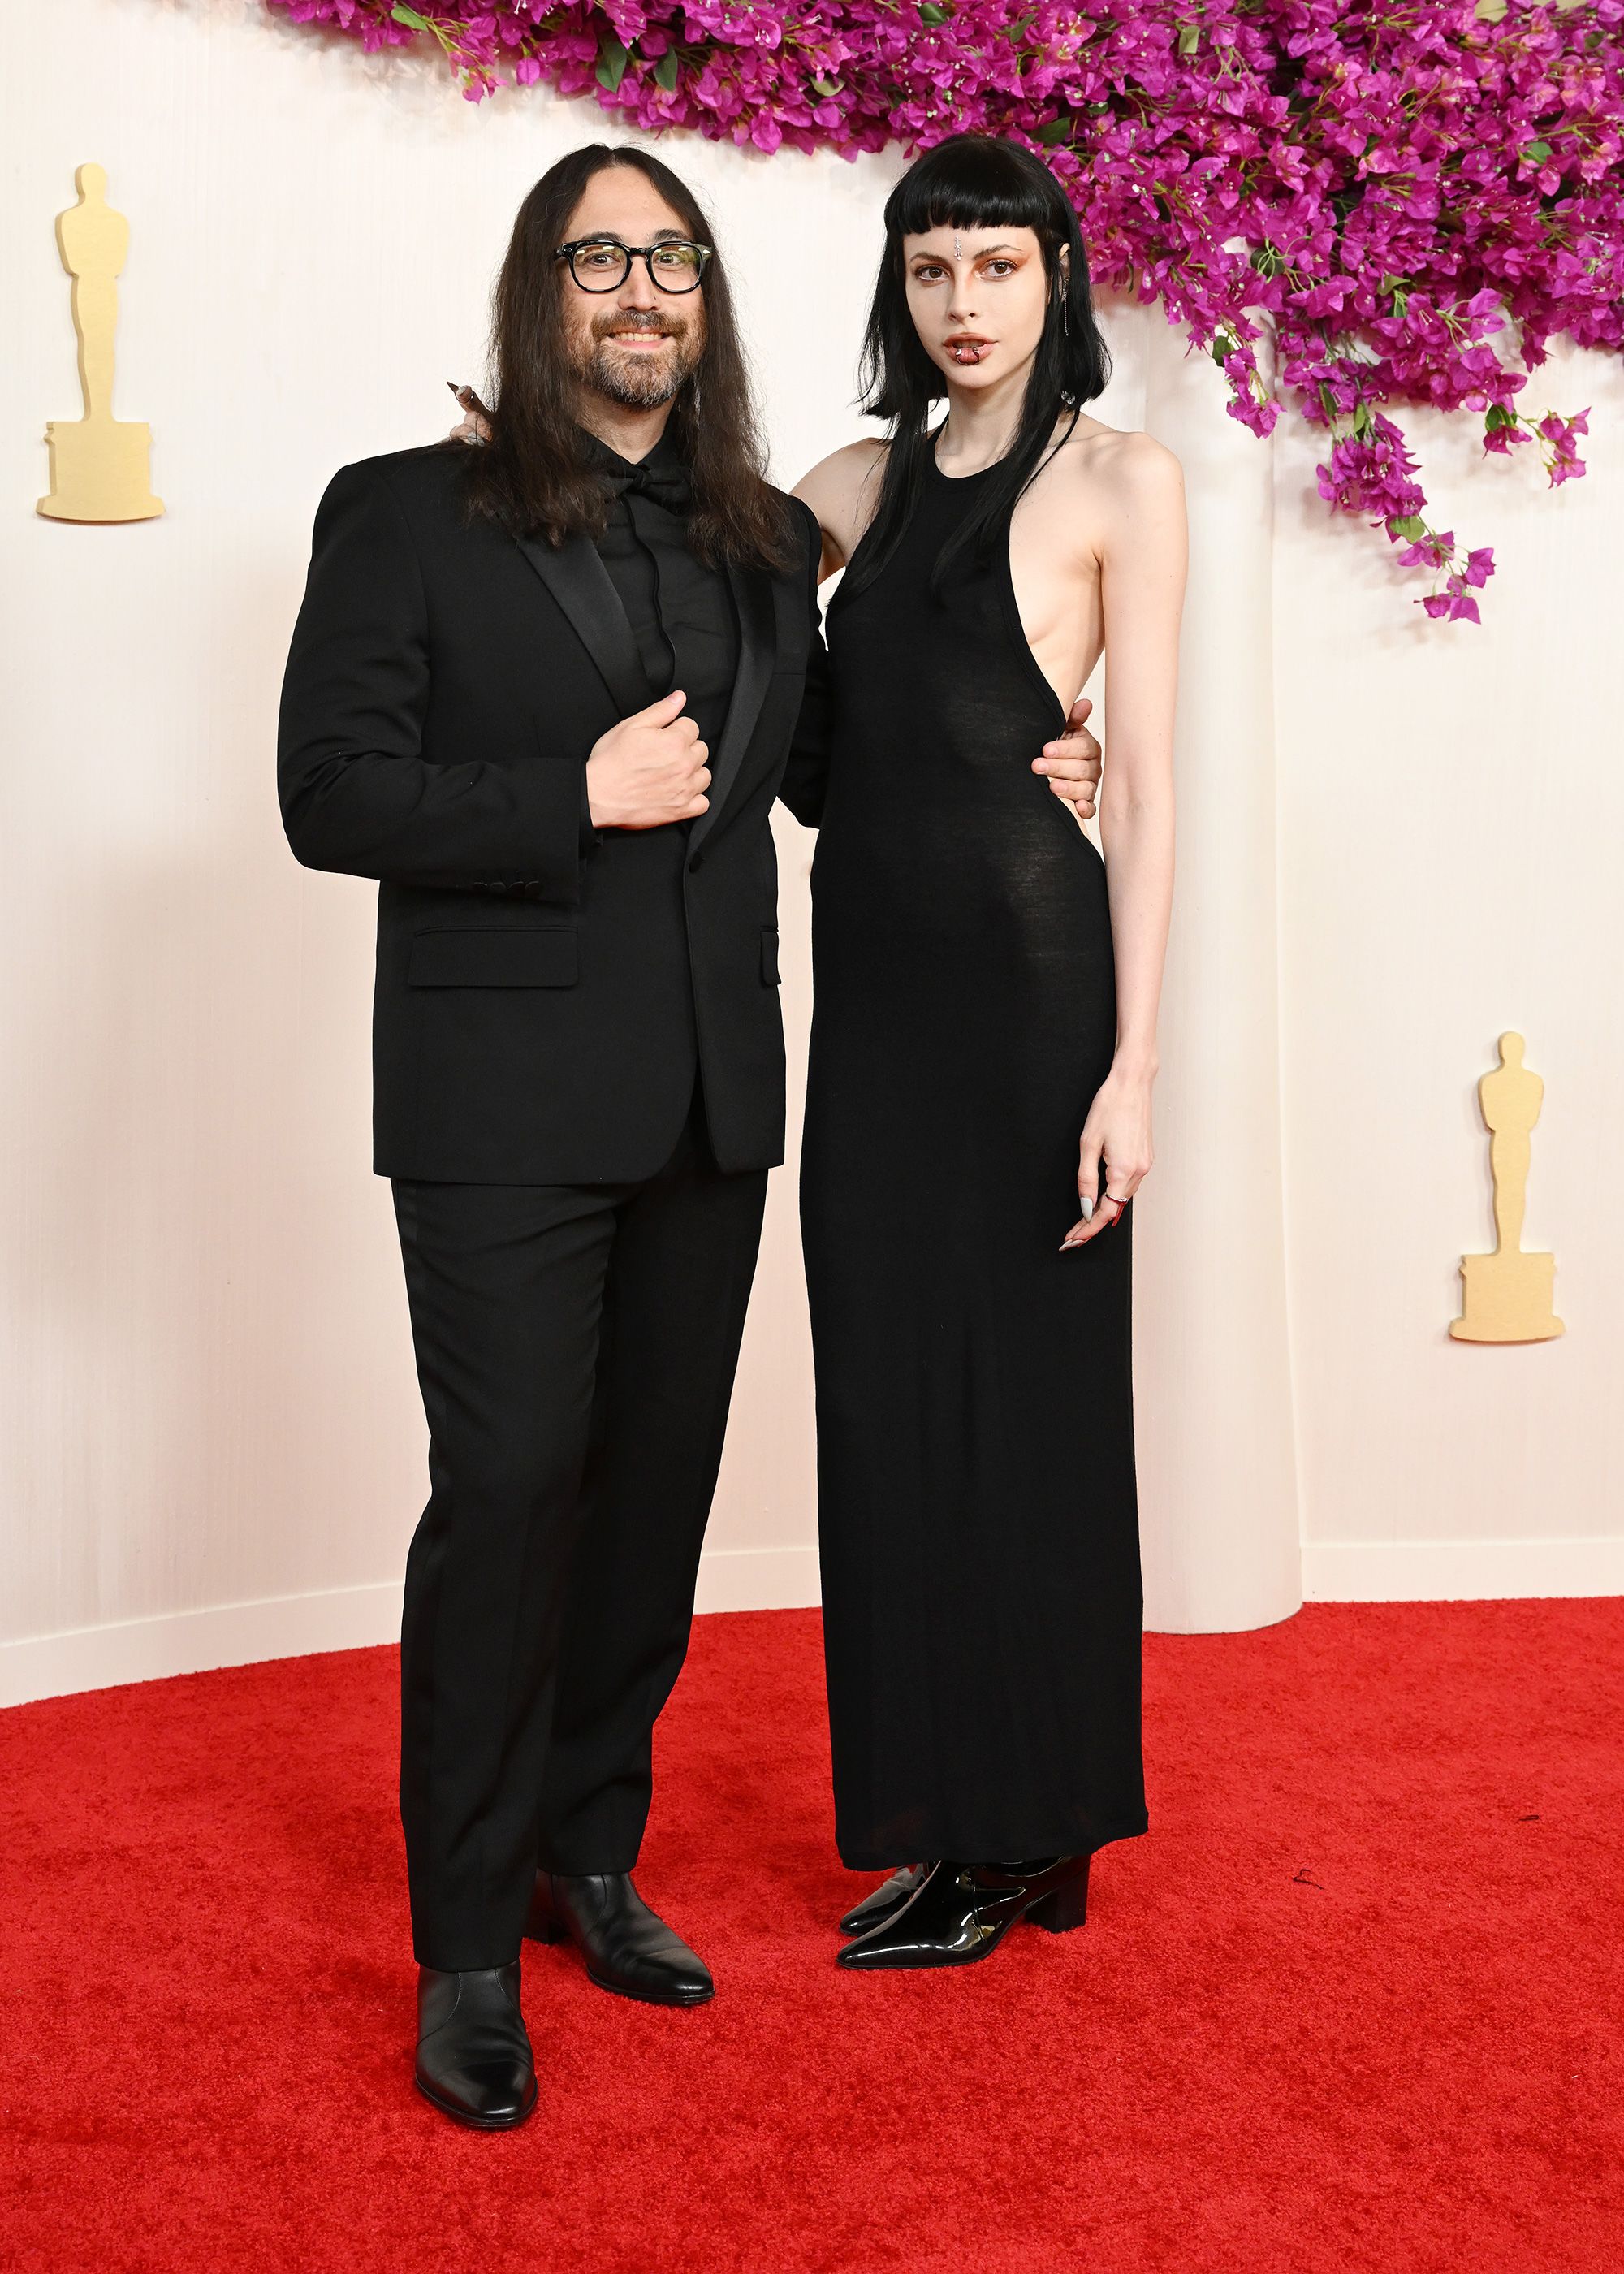 Sean Lennon, son of John Lennon and Yoko Ono, arrived with his partner Kemp Muhl in matching black outfits.